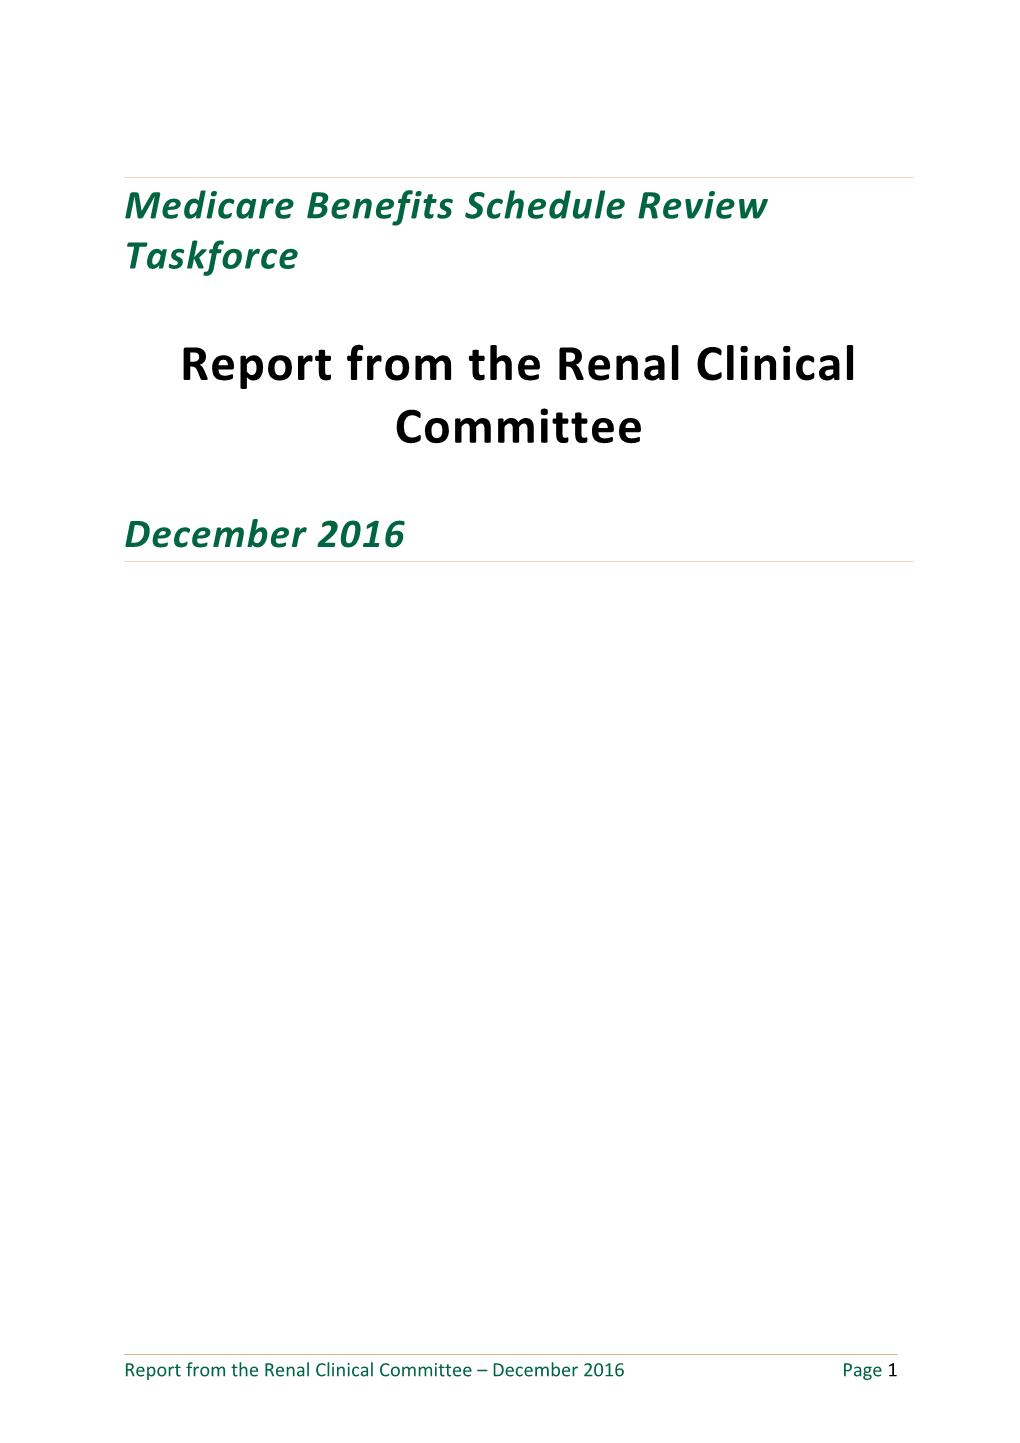 Renal Medicine Clinical Committee Report